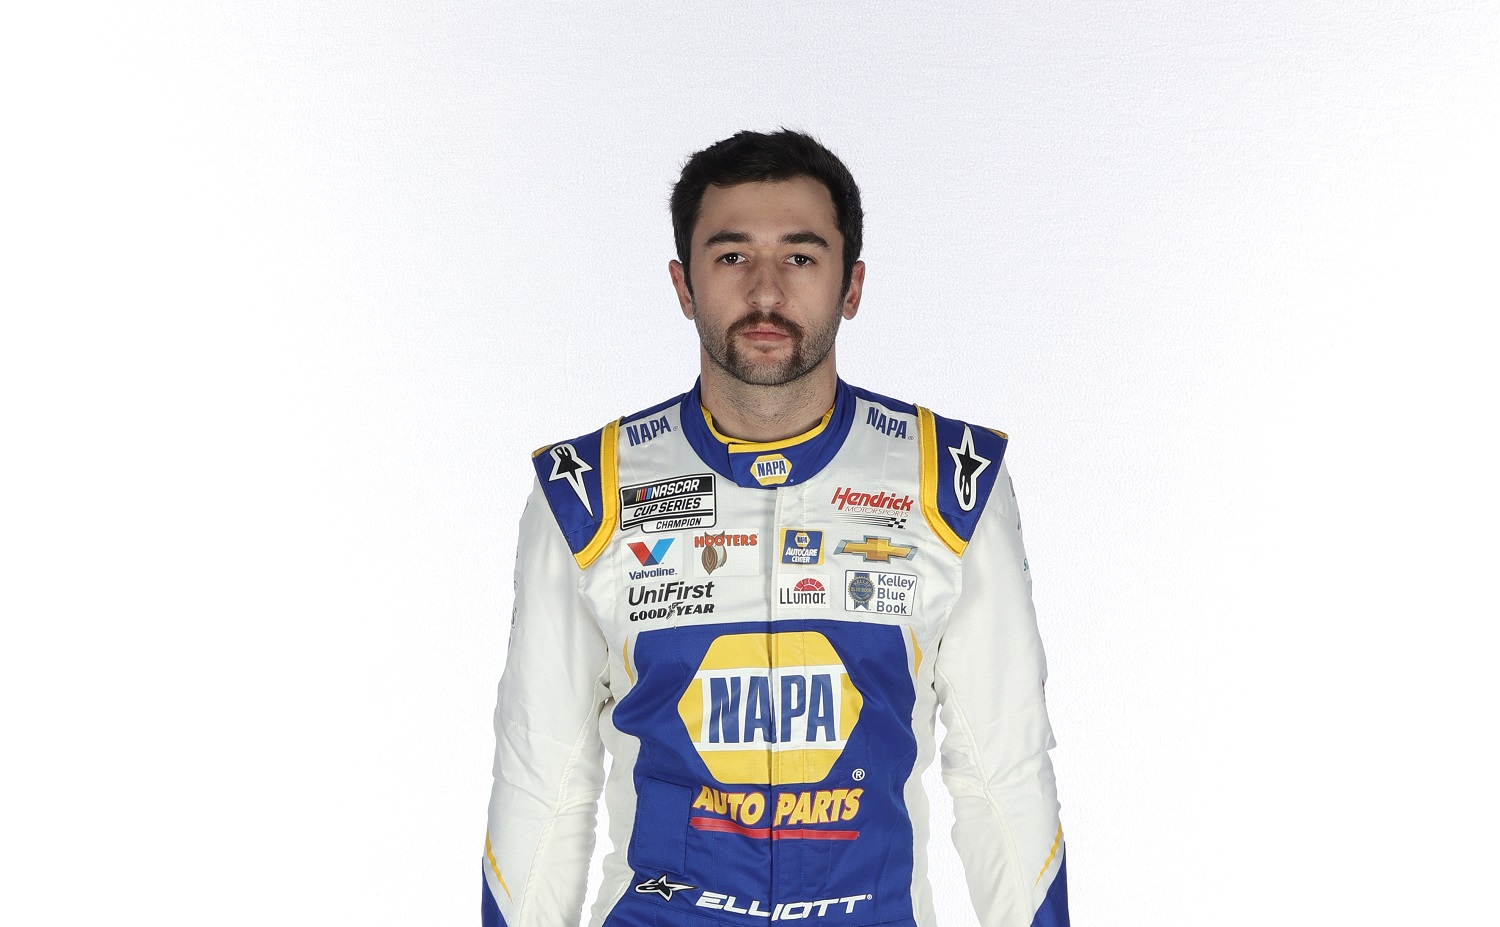 Chase Elliott comes into the 2021 NASCAR Cup Series as the defending champion.